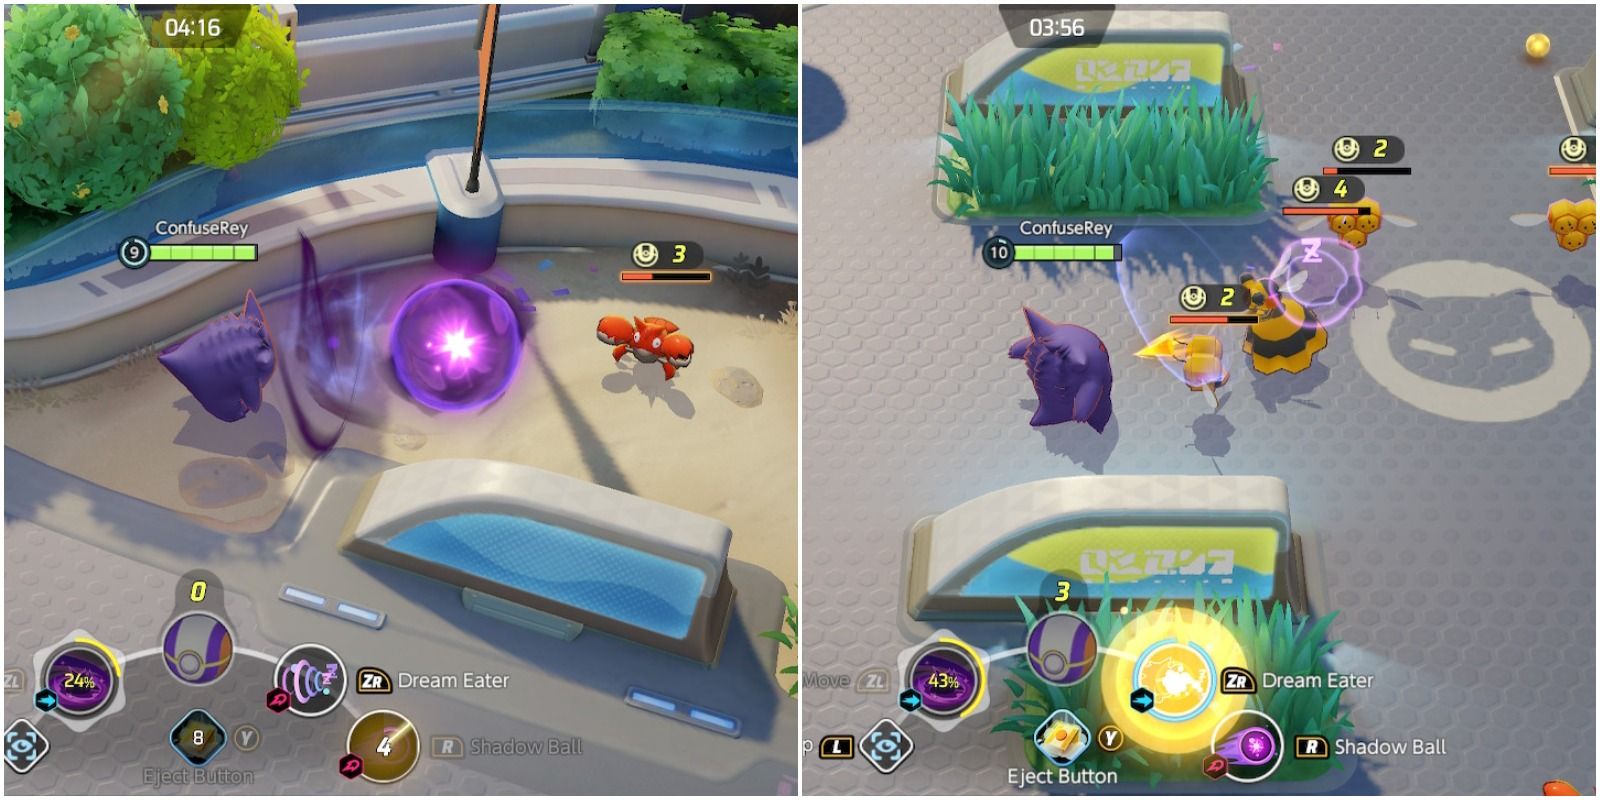 gengar using shadow ball and dream eater in battle.